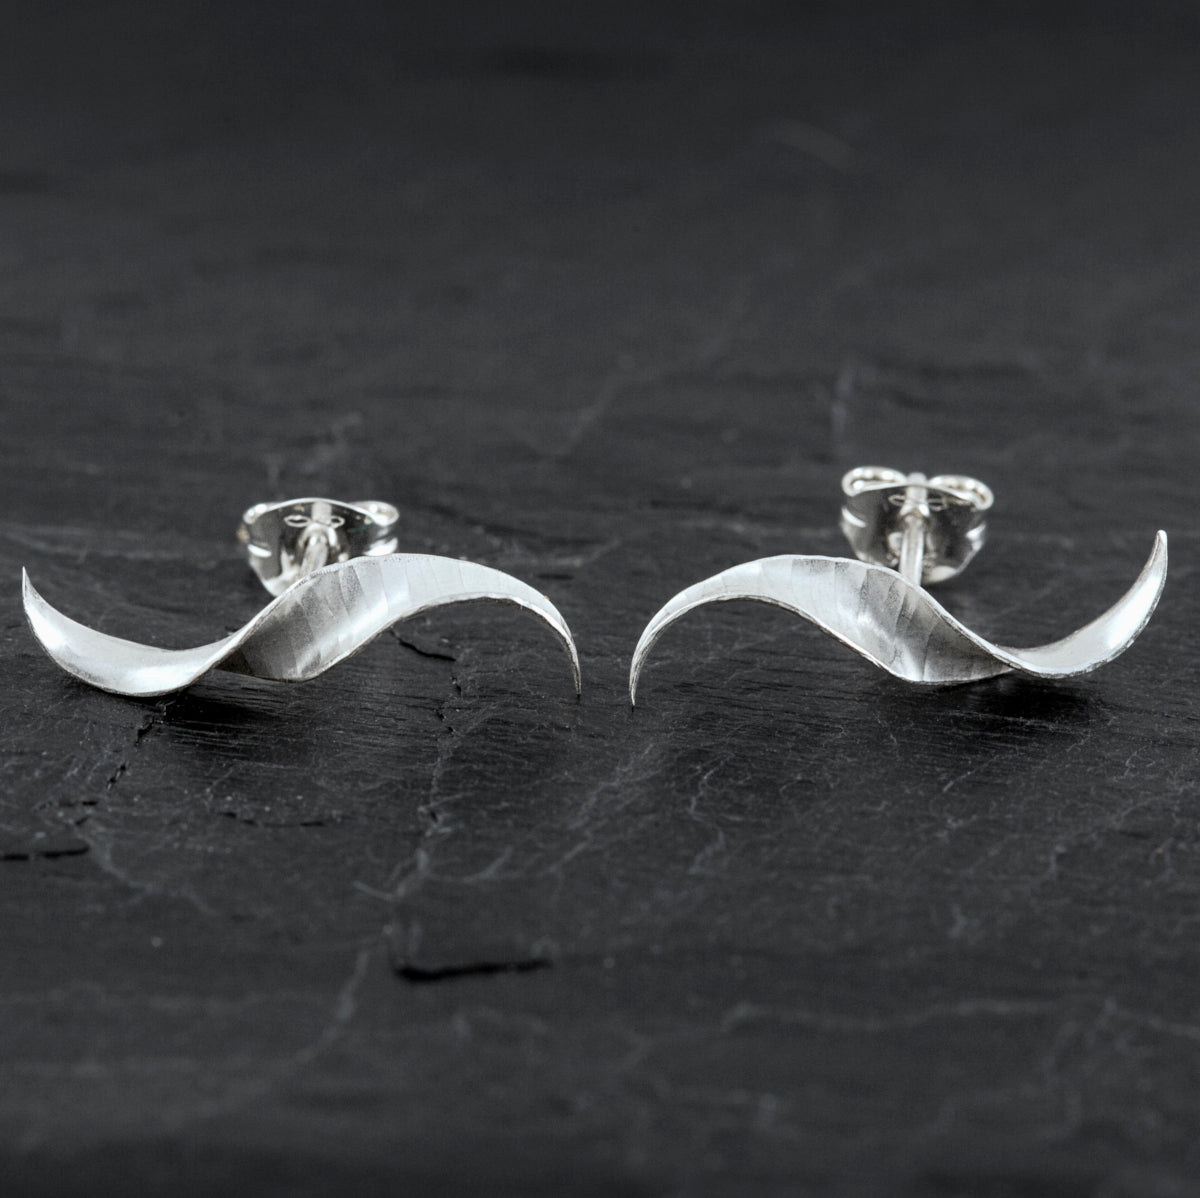 A pair of simple mirror-image silver twist earrings. They each have a stretched-S shape, a hammered texture, non-shiny finish and glittering edges. They are shown on a slate background.